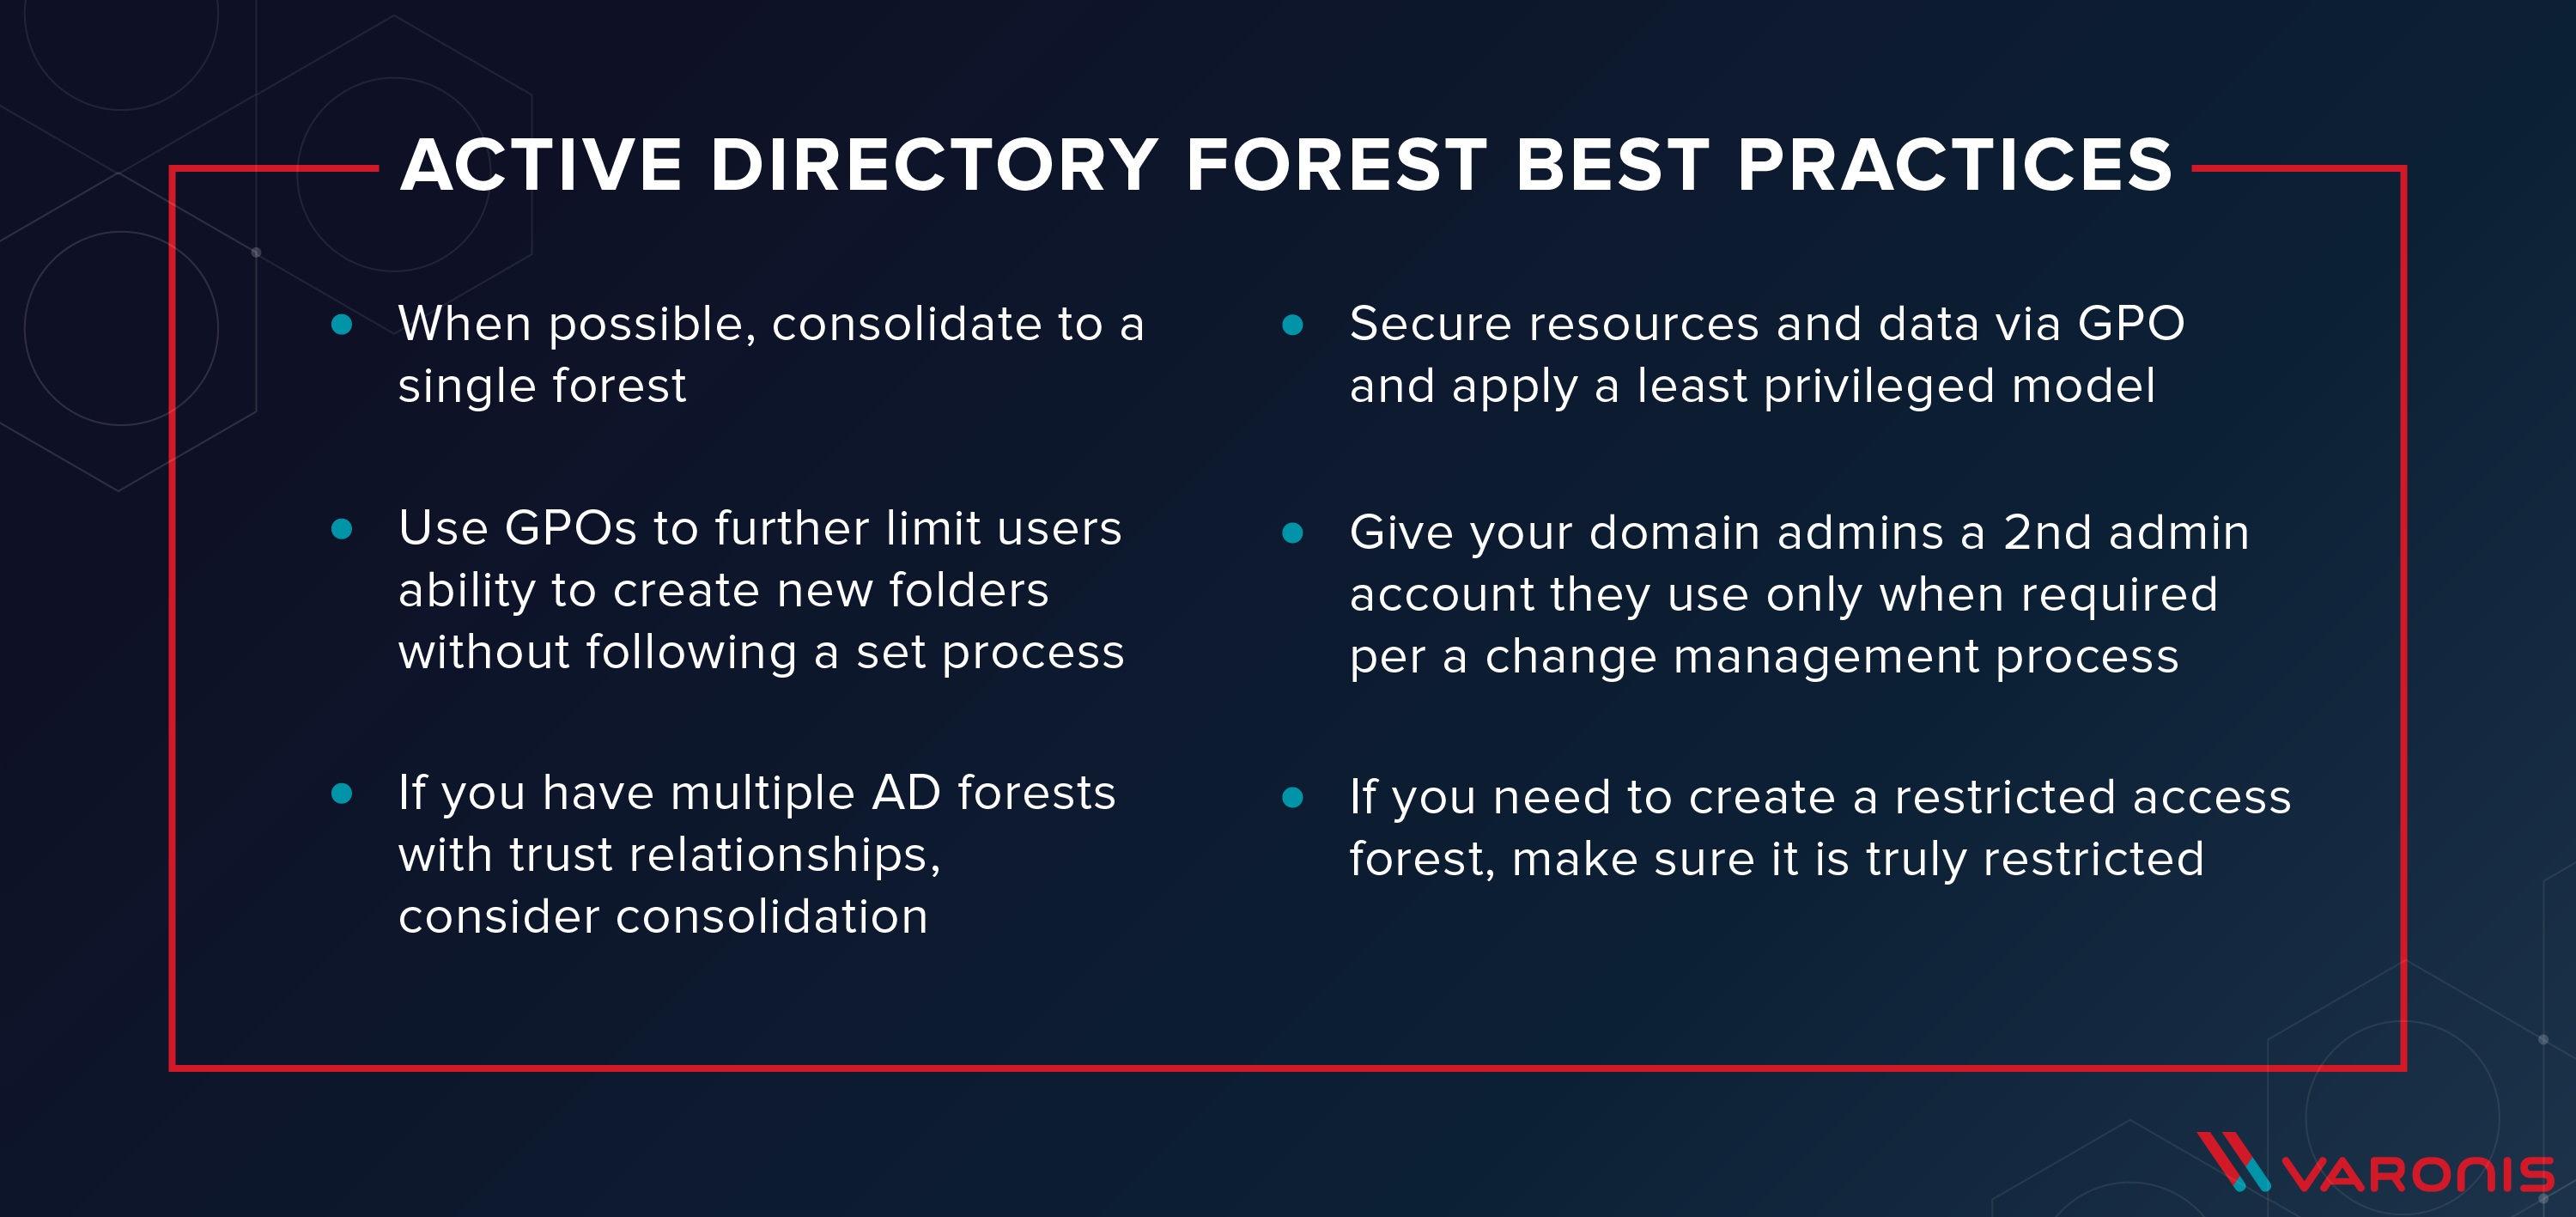 active directory forest best practices - forêt active directory